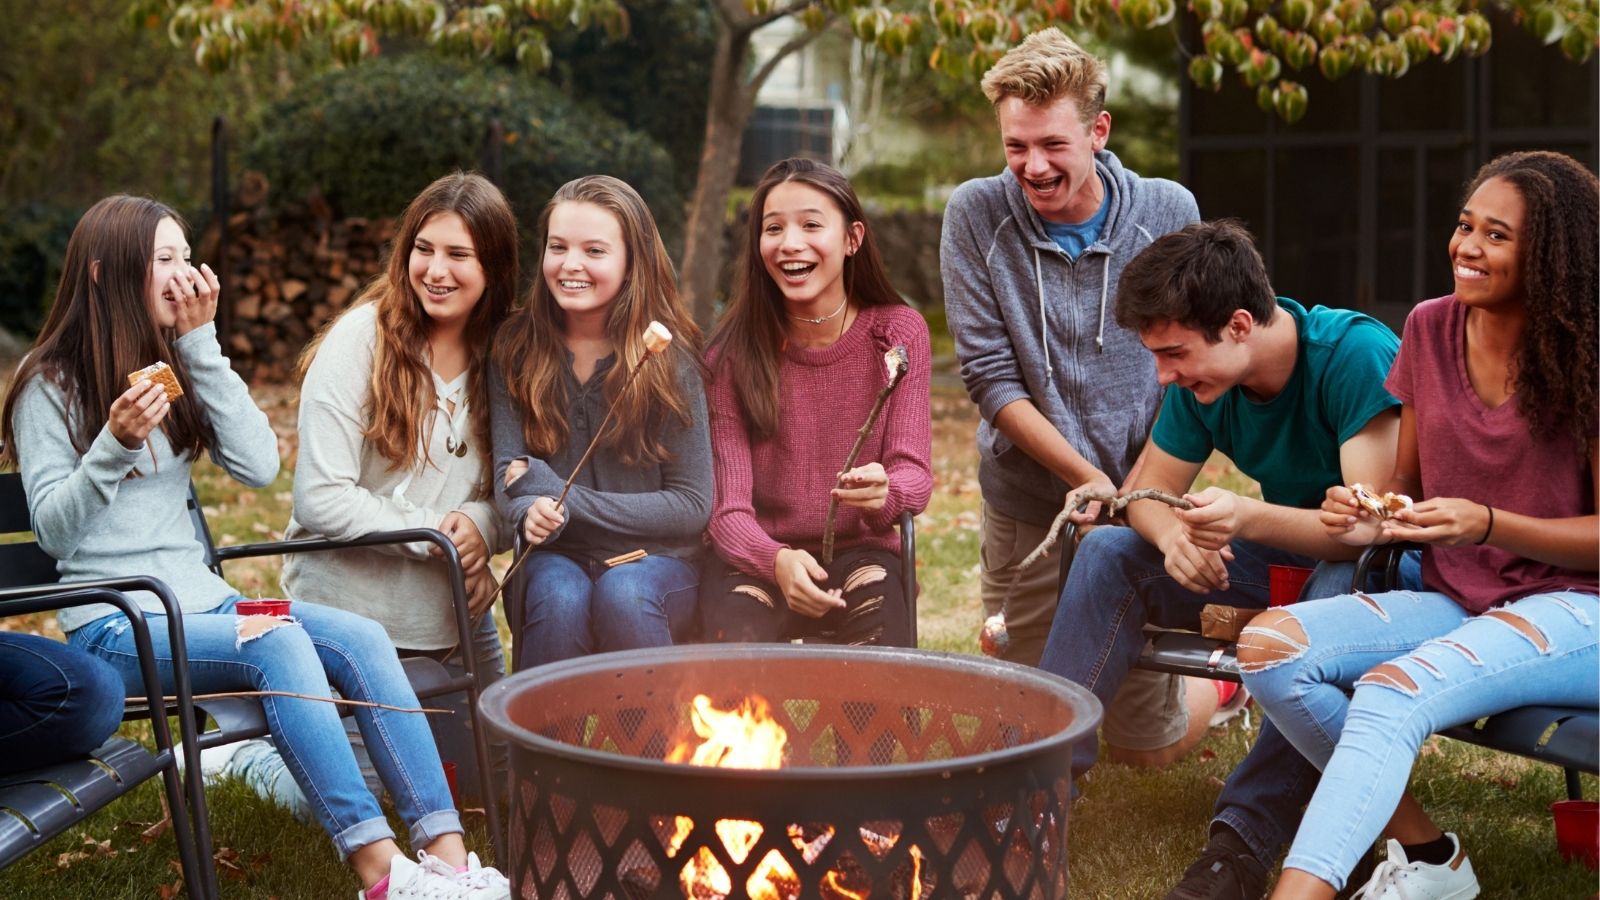 Teenagers roasting marshmallows around a fire pit (Photo: Shutterstock)